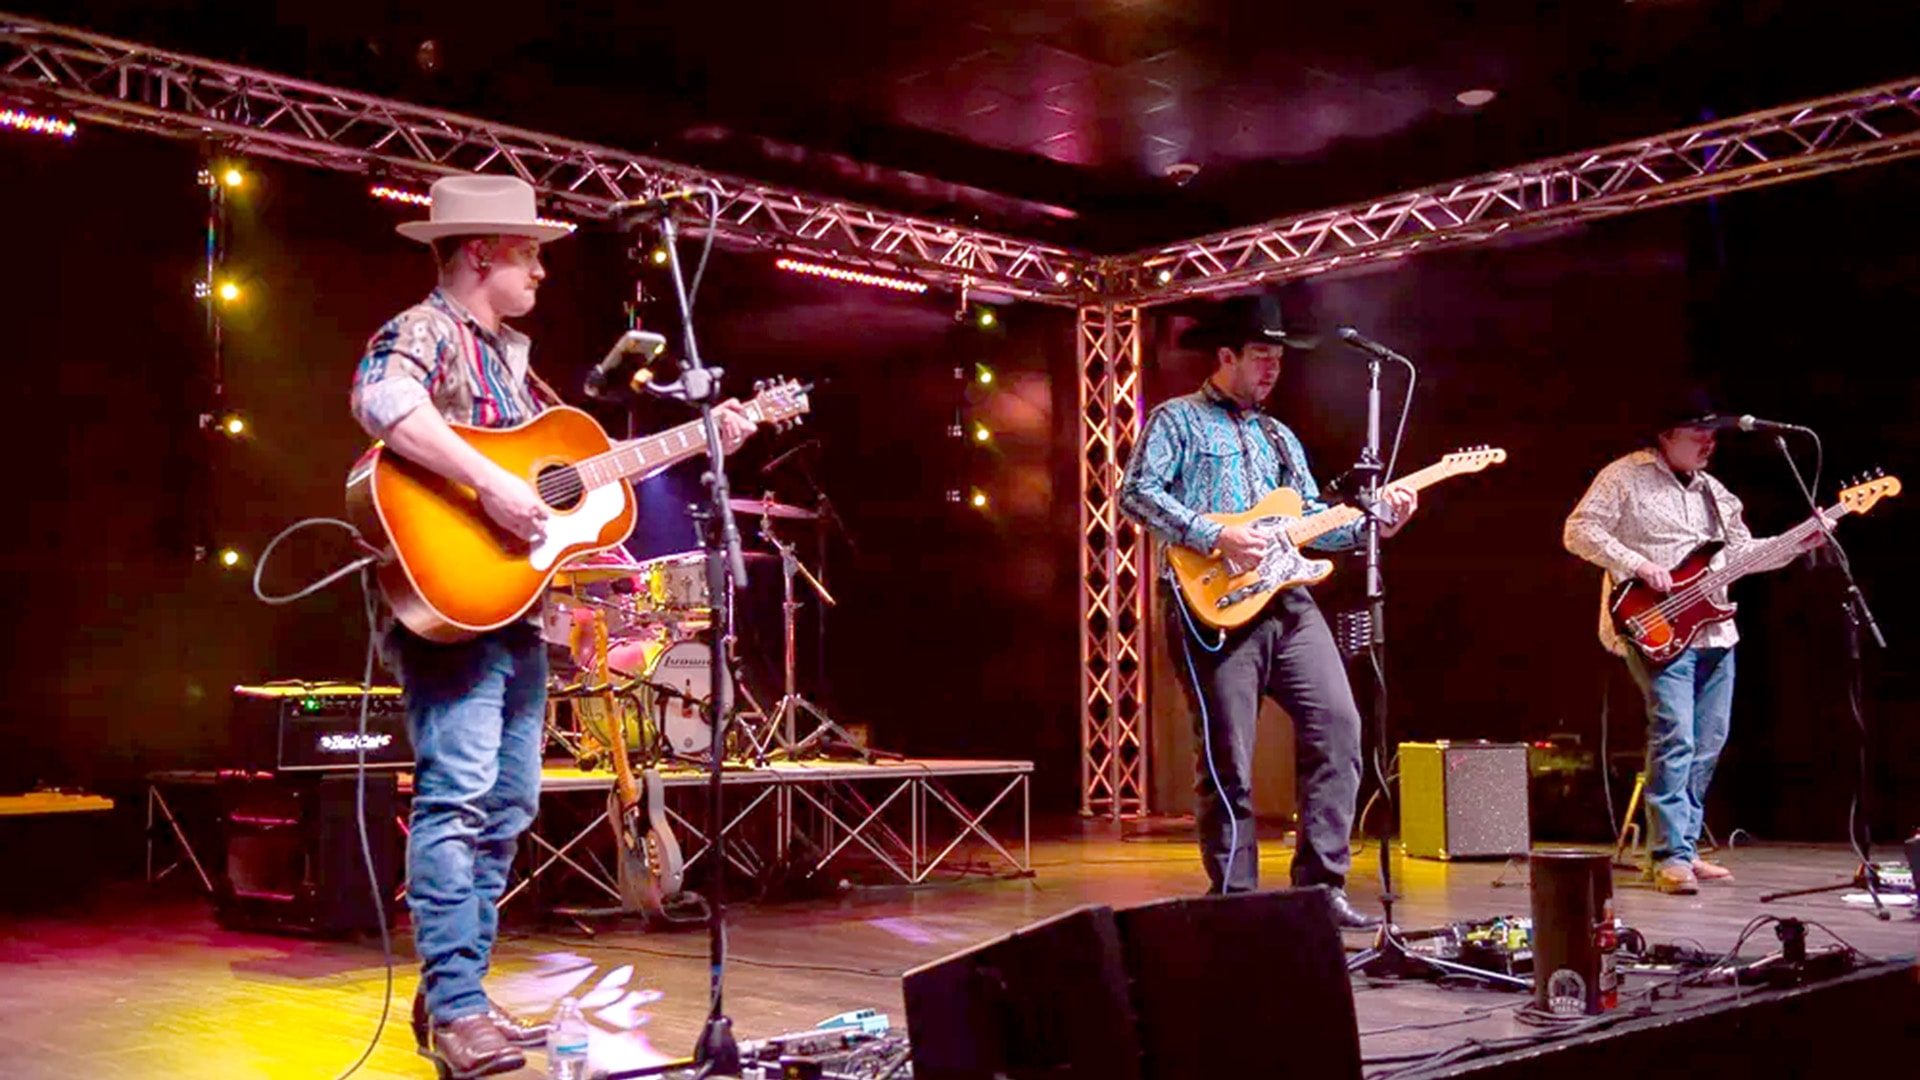 Whisky Outlaws band performing on stage with guitars and cowboy hats.